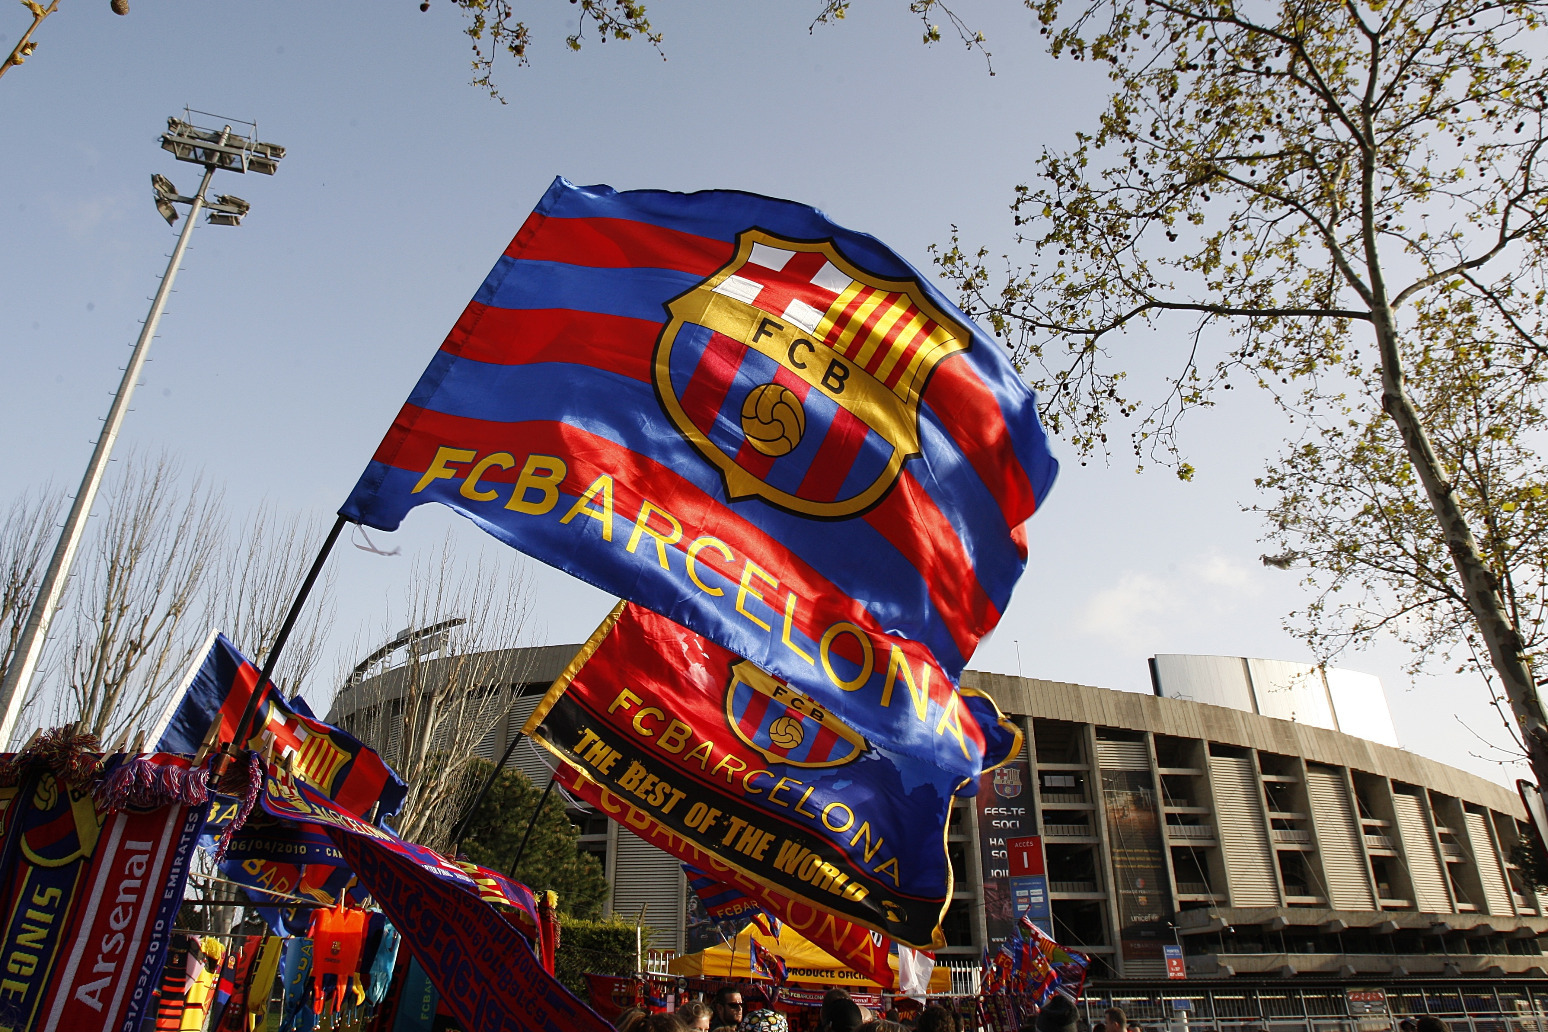 Barcelona fine for breach of UEFA financial rules upheld following appeal 